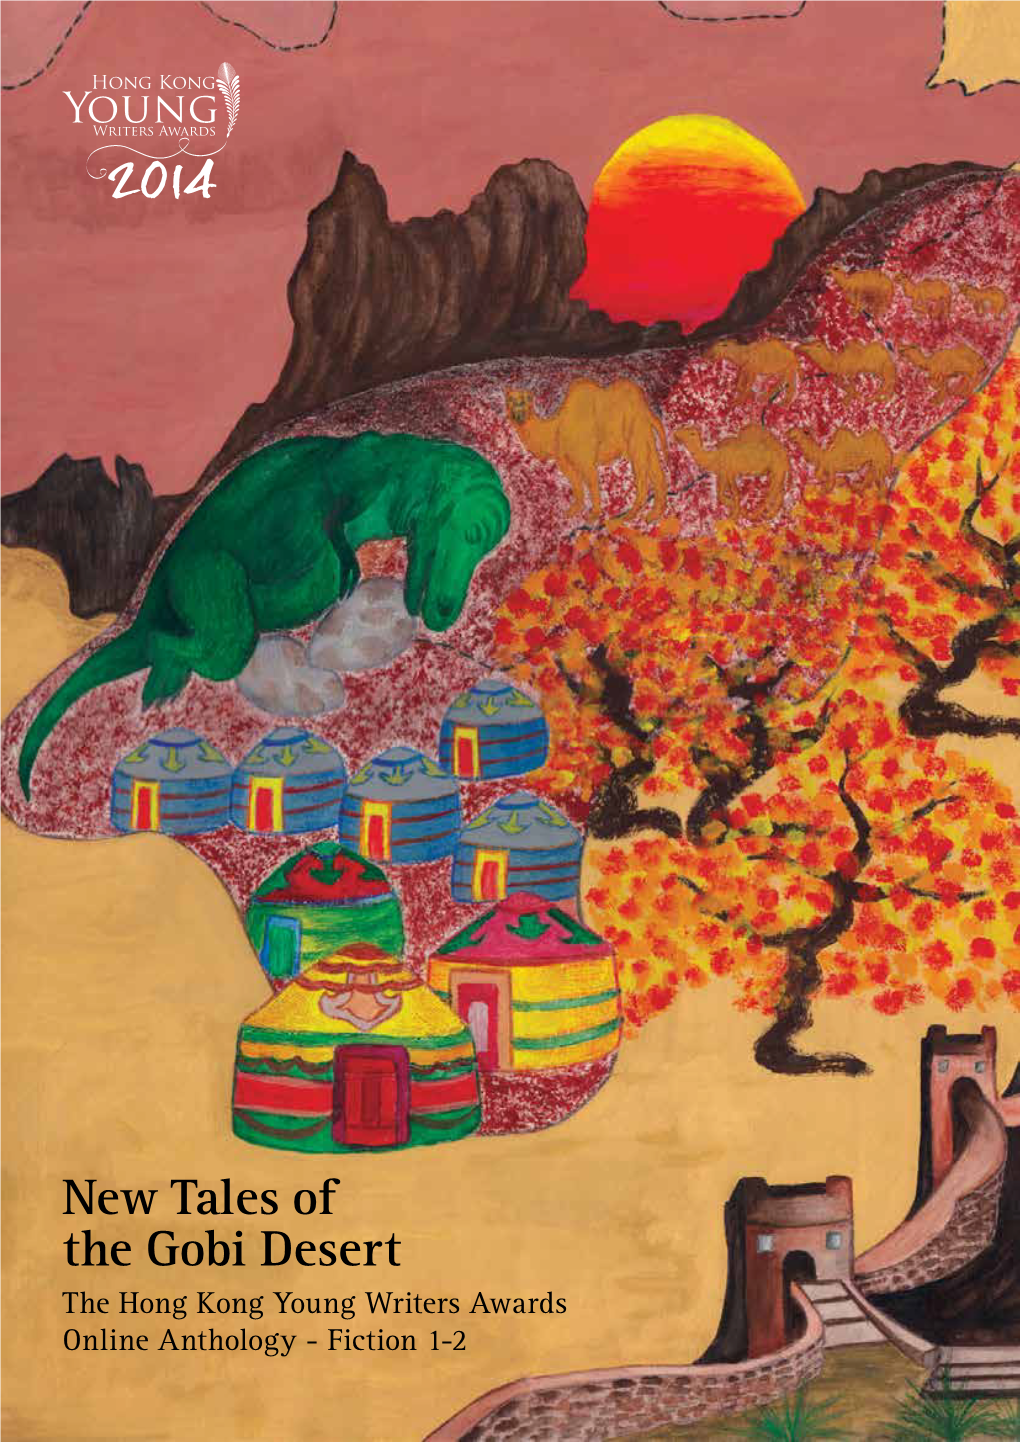 New Tales of the Gobi Desert the Hong Kong Young Writers Awards Online Anthology - Fiction 1-2 Sponsors